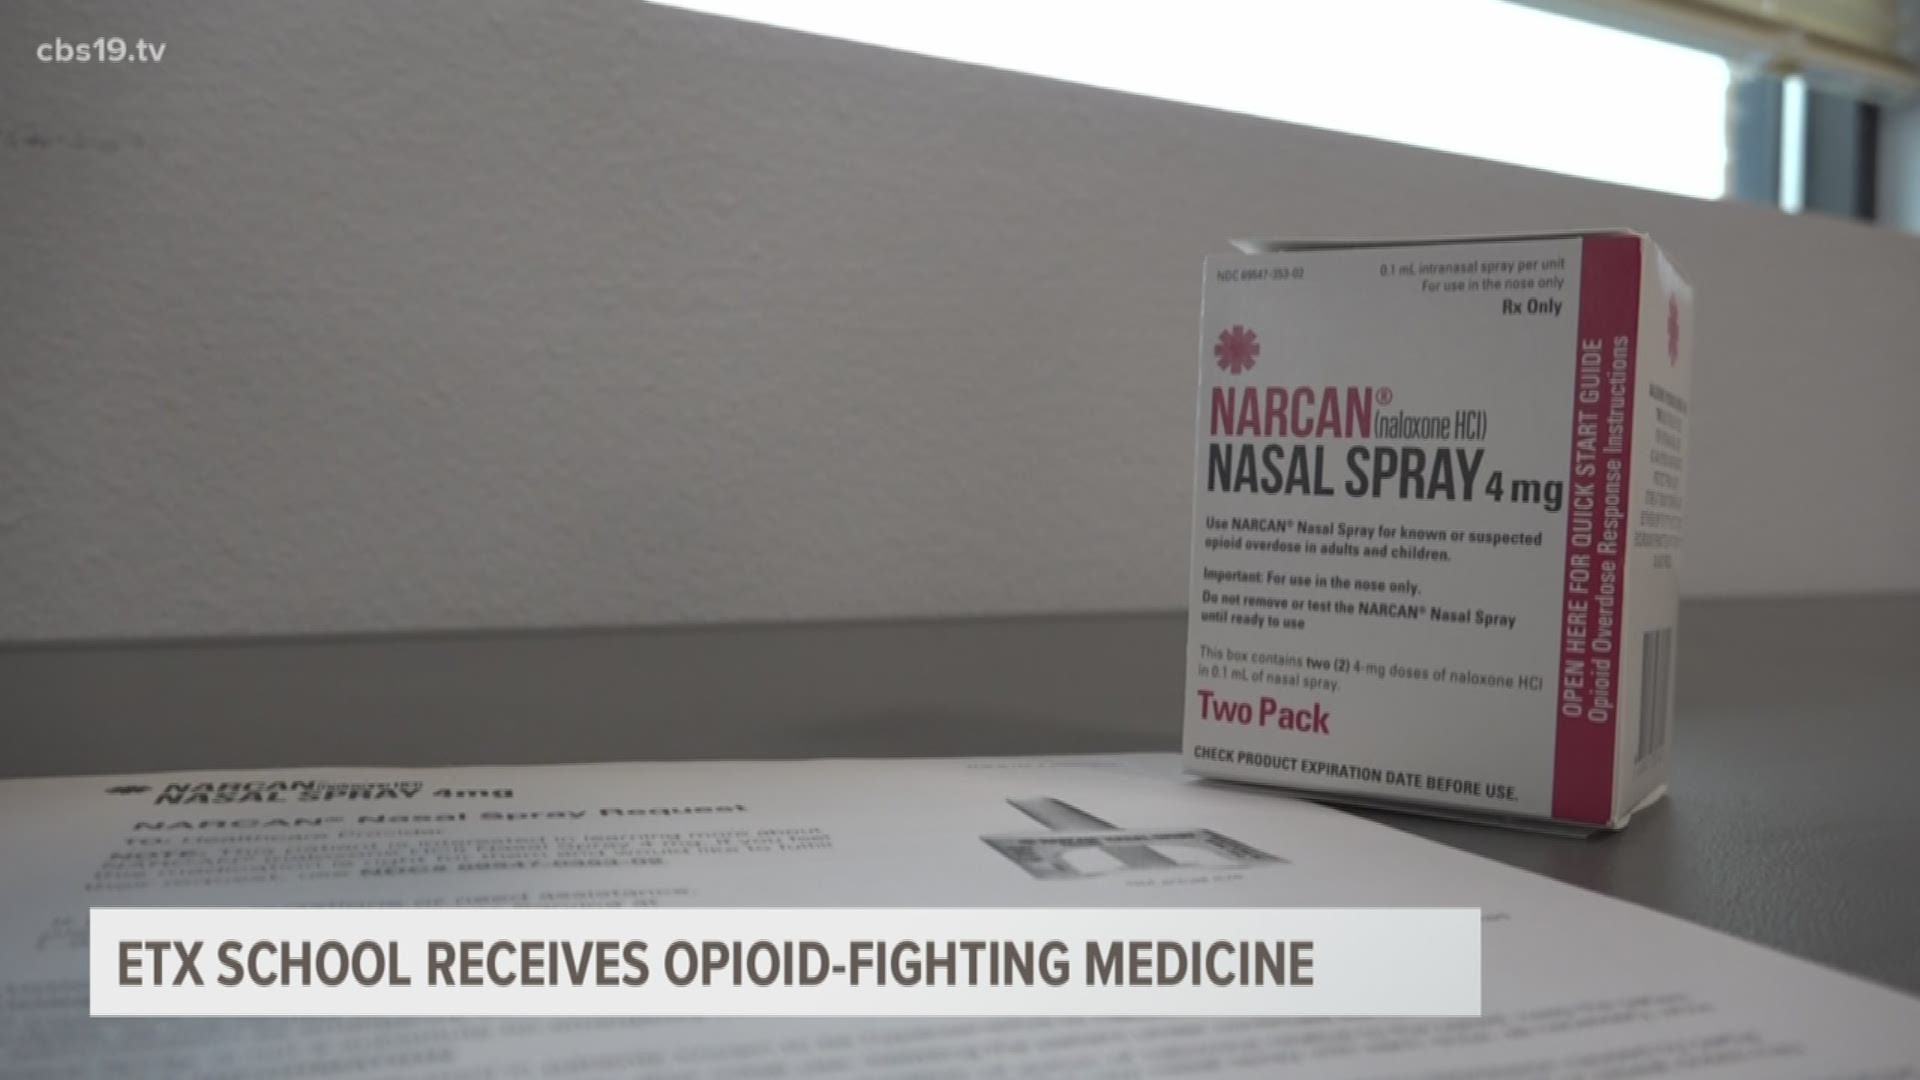 Narcan is able to provide immediate relief in case of a student overdose on opioids.